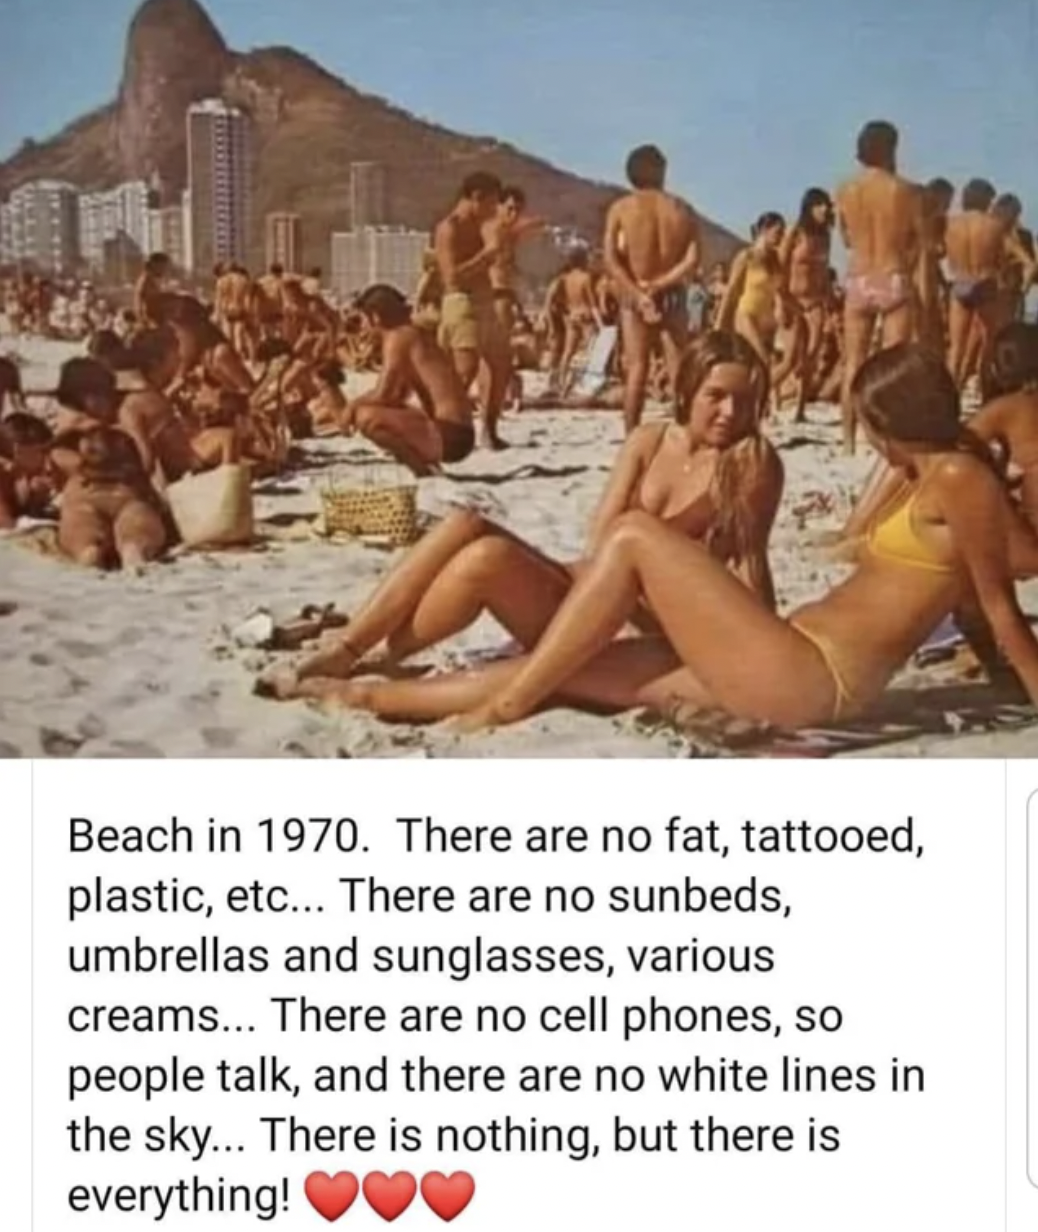 facepalms - sun tanning - Beach in 1970. There are no fat, tattooed, plastic, etc... There are no sunbeds, umbrellas and sunglasses, various creams... There are no cell phones, so people talk, and there are no white lines in the sky... There is nothing, b